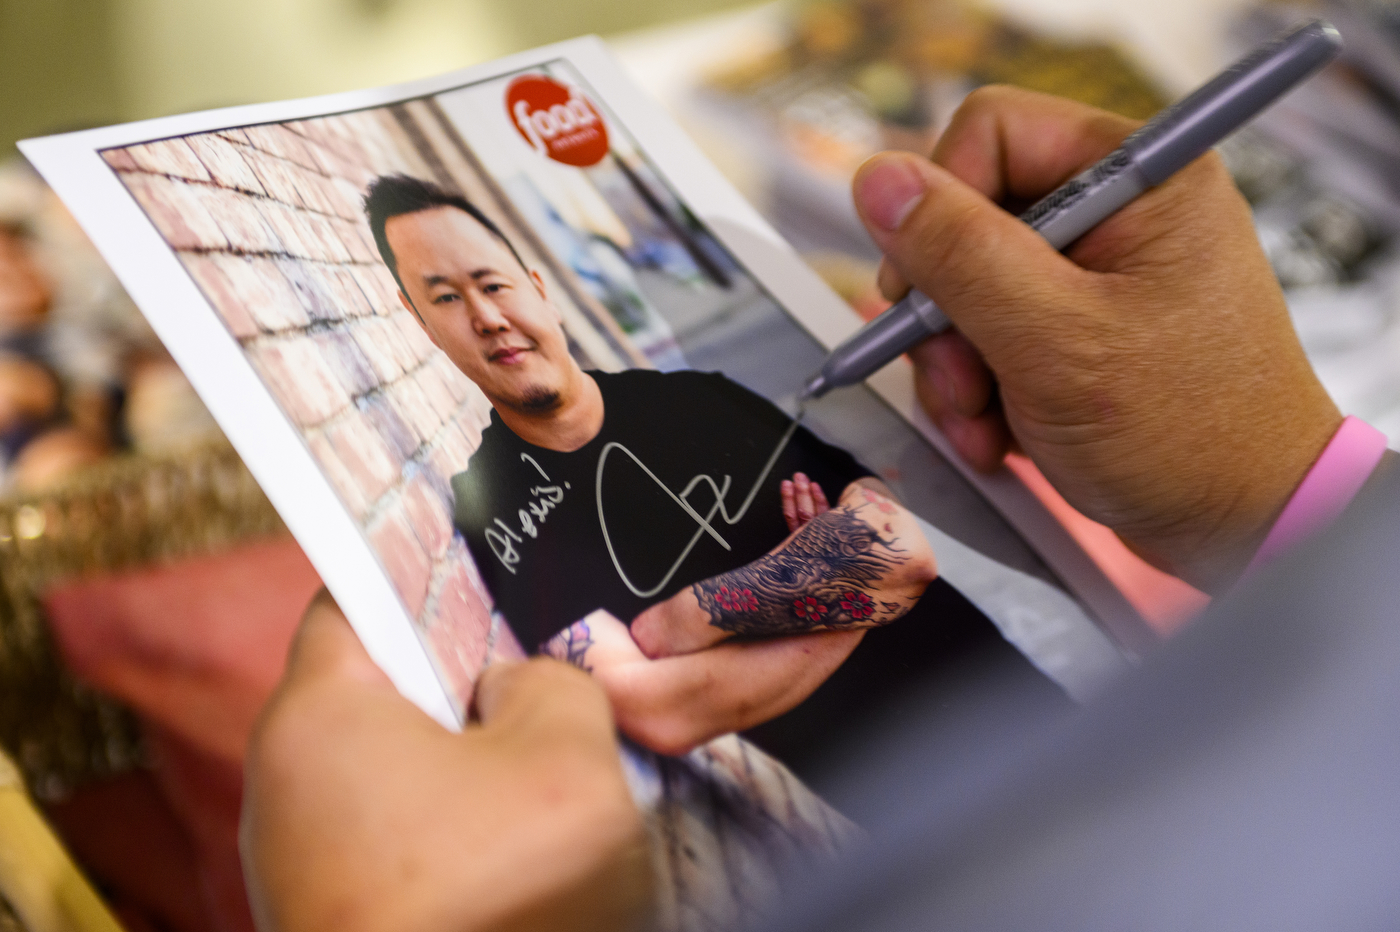 chef tila signing a photograph of himself